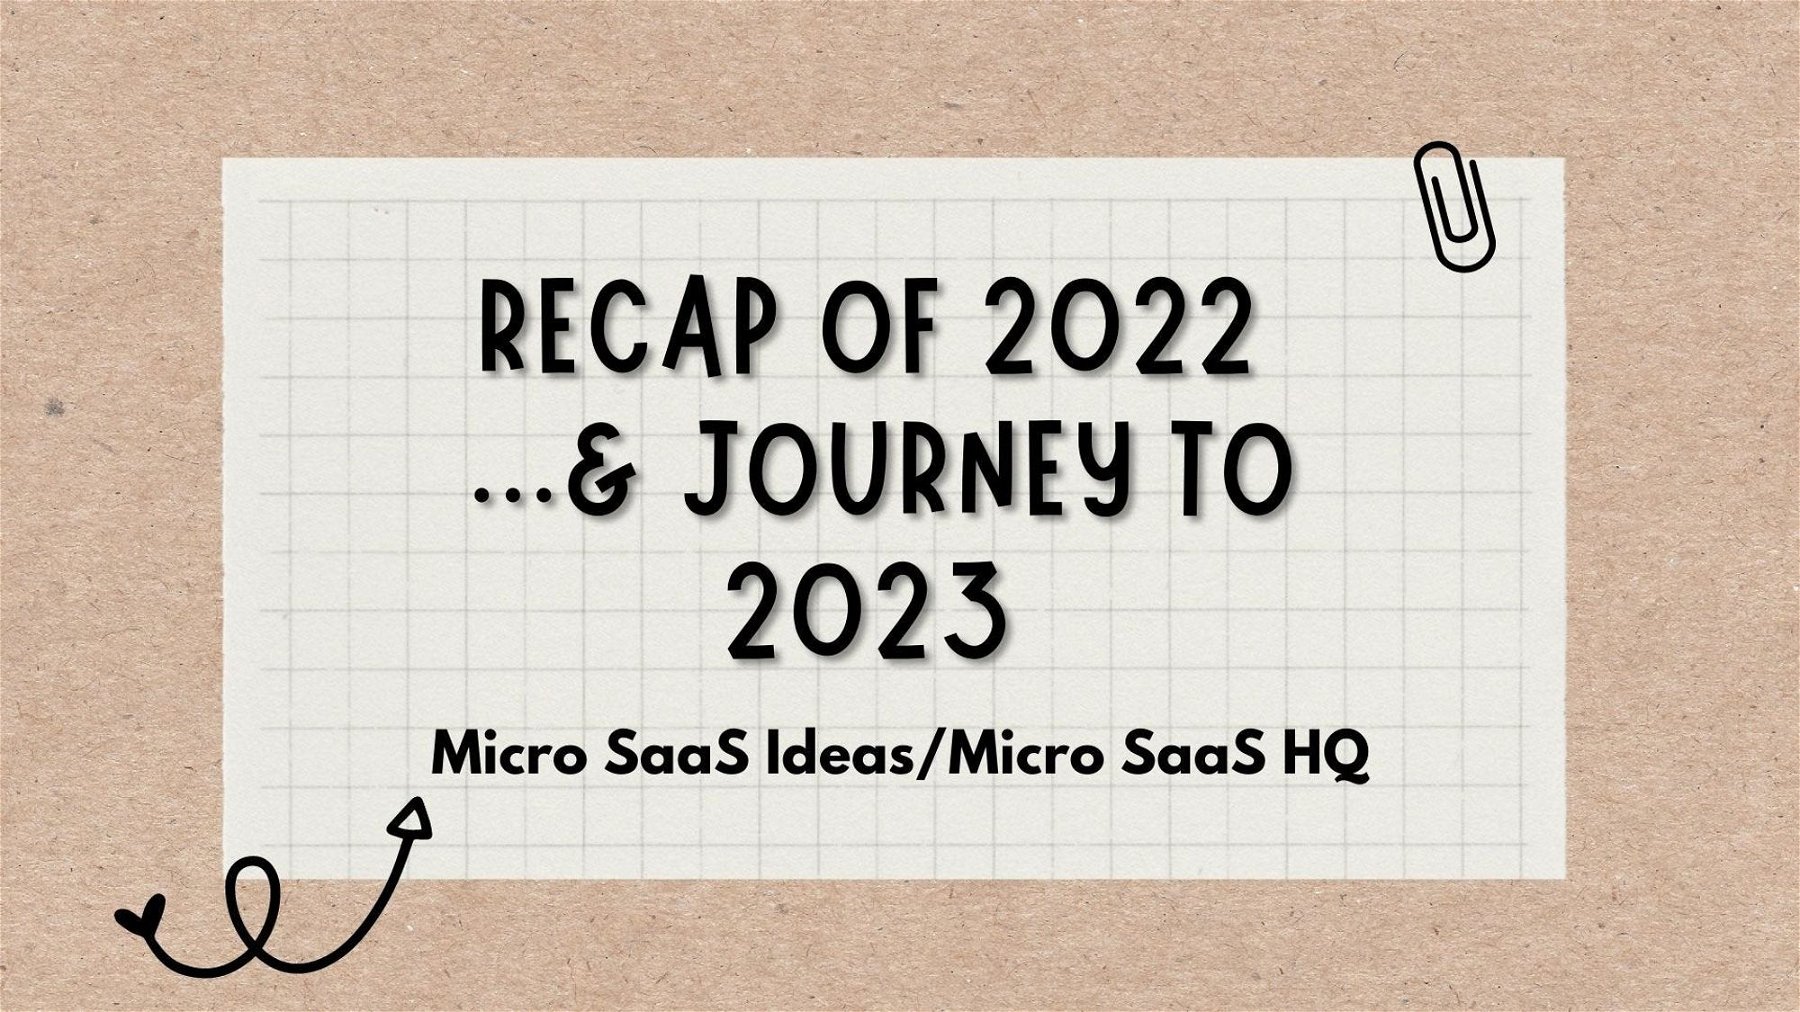 Micro SaaS HQ - Recap of 2022 and Plan for 2023